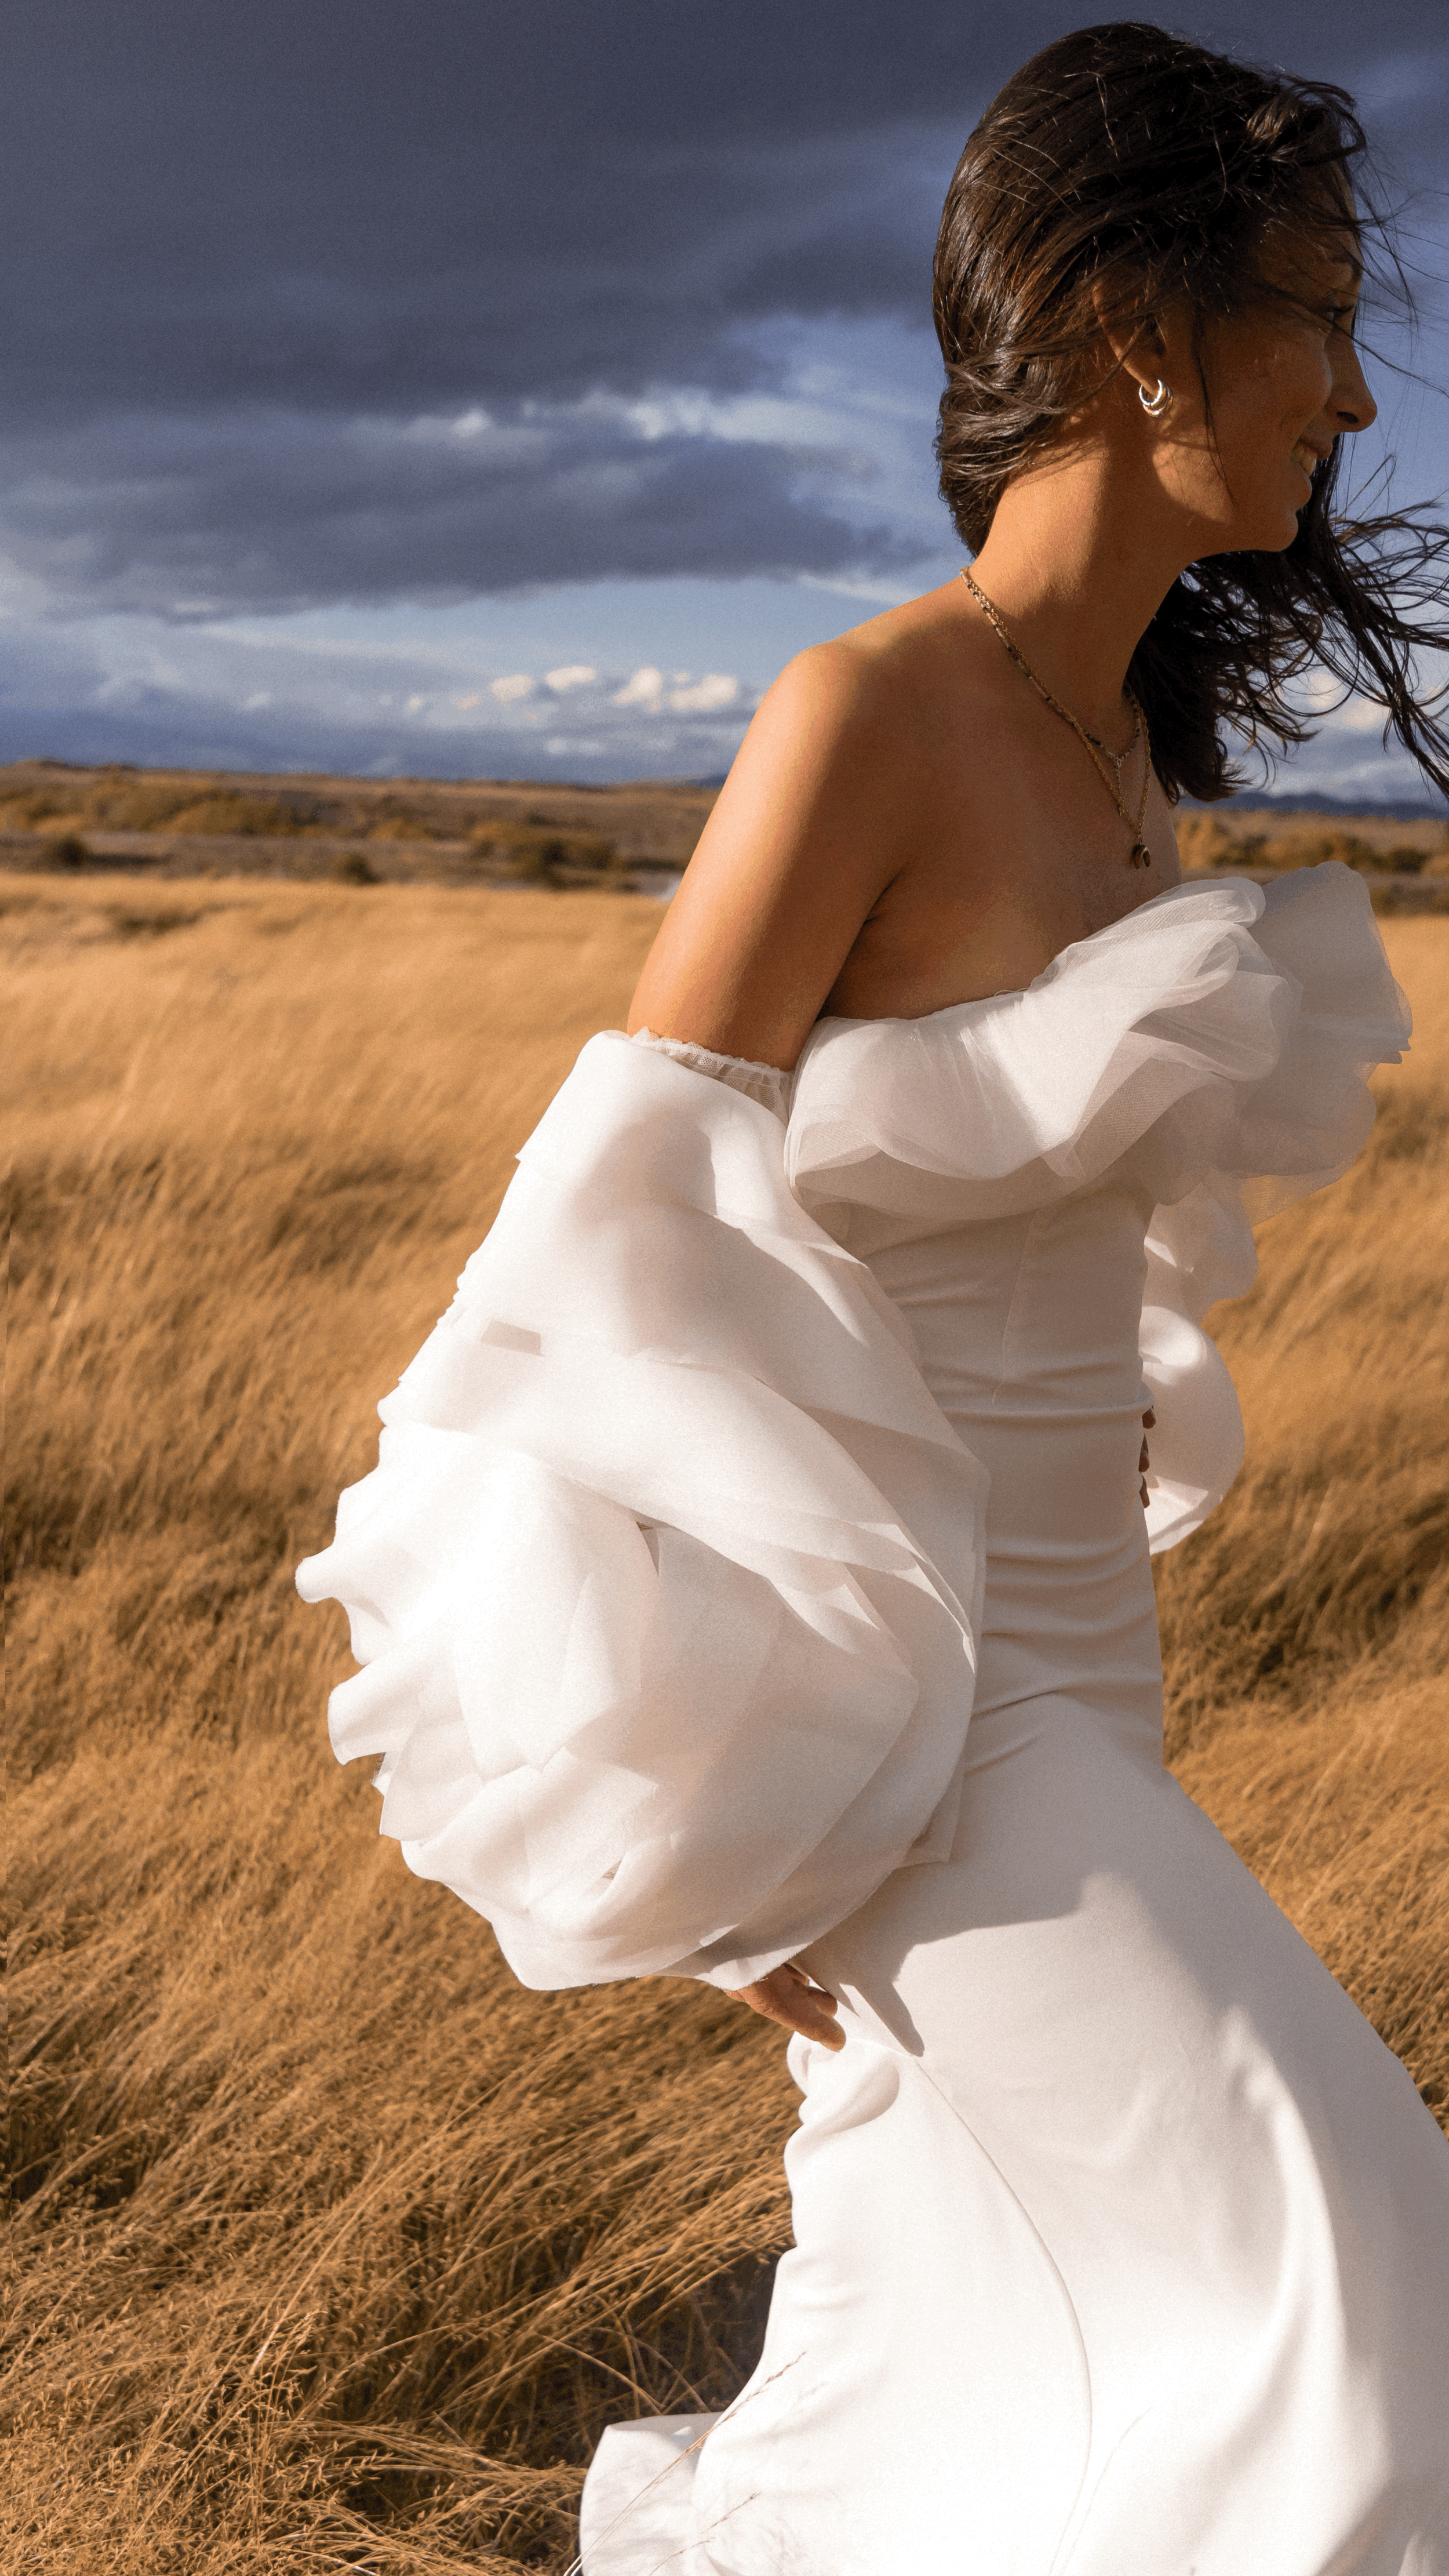 Sweet reveal with these perfect destination wedding gowns